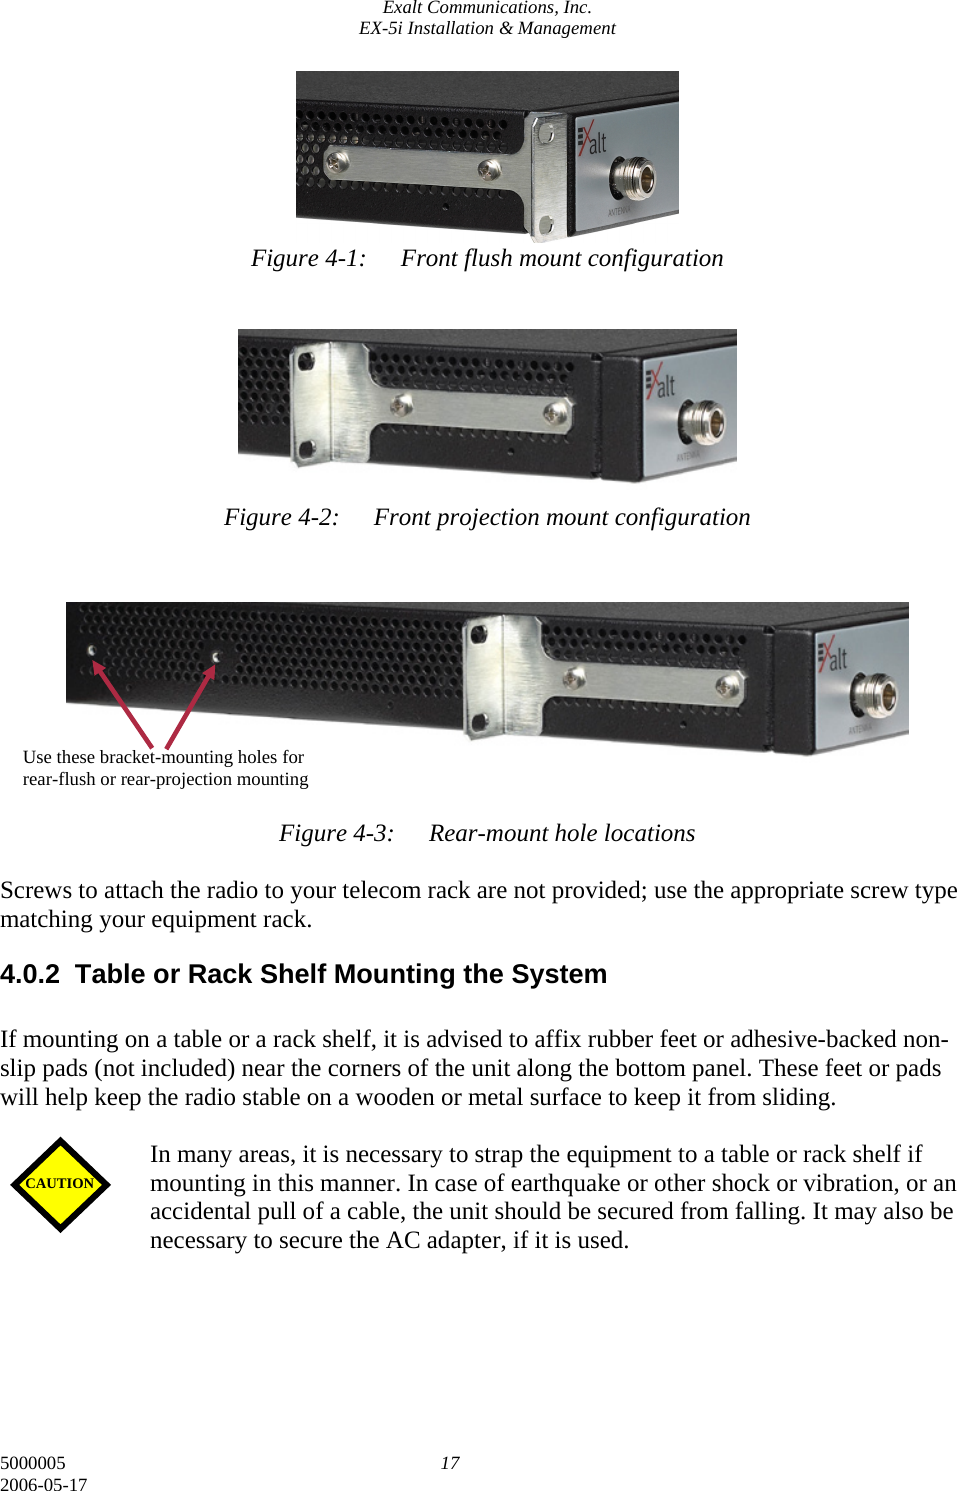 Exalt Communications, Inc. EX-5i Installation &amp; Management 5000005  17 2006-05-17       Figure 4-1:  Front flush mount configuration         Figure 4-2:  Front projection mount configuration           Figure 4-3:  Rear-mount hole locations  Screws to attach the radio to your telecom rack are not provided; use the appropriate screw type matching your equipment rack. 4.0.2  Table or Rack Shelf Mounting the System  If mounting on a table or a rack shelf, it is advised to affix rubber feet or adhesive-backed non-slip pads (not included) near the corners of the unit along the bottom panel. These feet or pads will help keep the radio stable on a wooden or metal surface to keep it from sliding.   In many areas, it is necessary to strap the equipment to a table or rack shelf if mounting in this manner. In case of earthquake or other shock or vibration, or an accidental pull of a cable, the unit should be secured from falling. It may also be necessary to secure the AC adapter, if it is used.     CAUTION Use these bracket-mounting holes for rear-flush or rear-projection mounting 